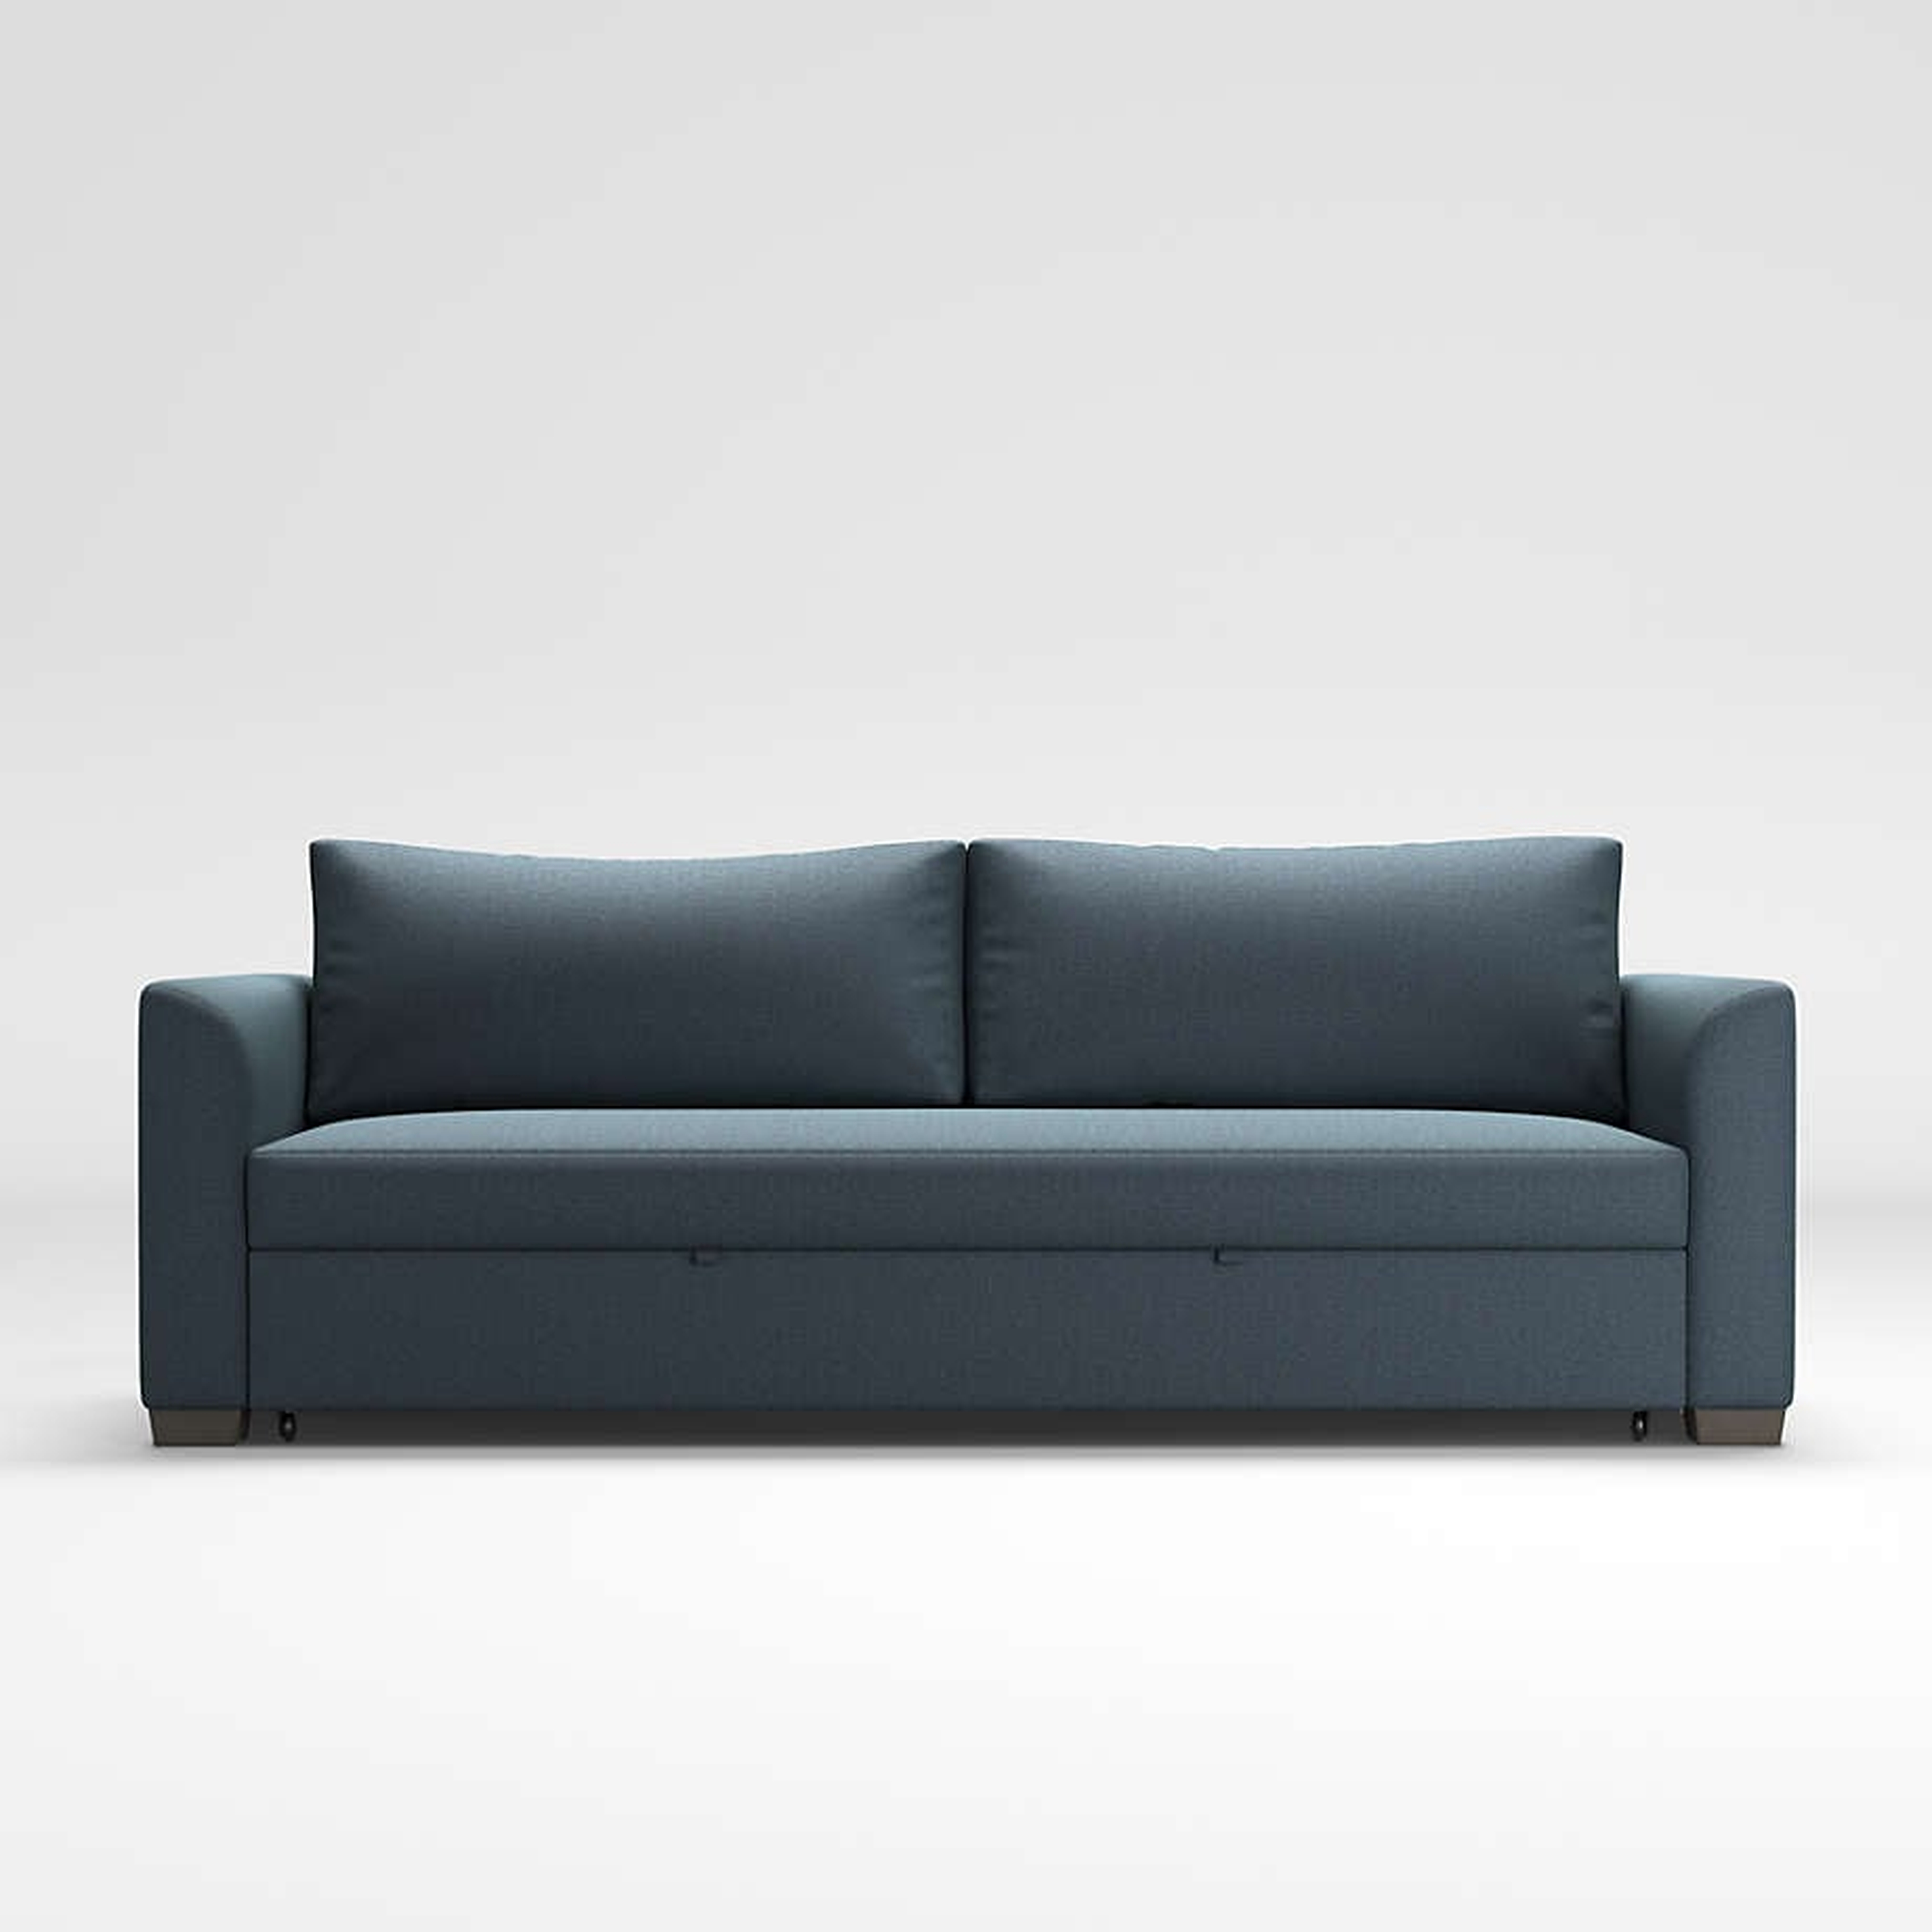 Bedford Queen Trundle Sleeper Sofa - Crate and Barrel